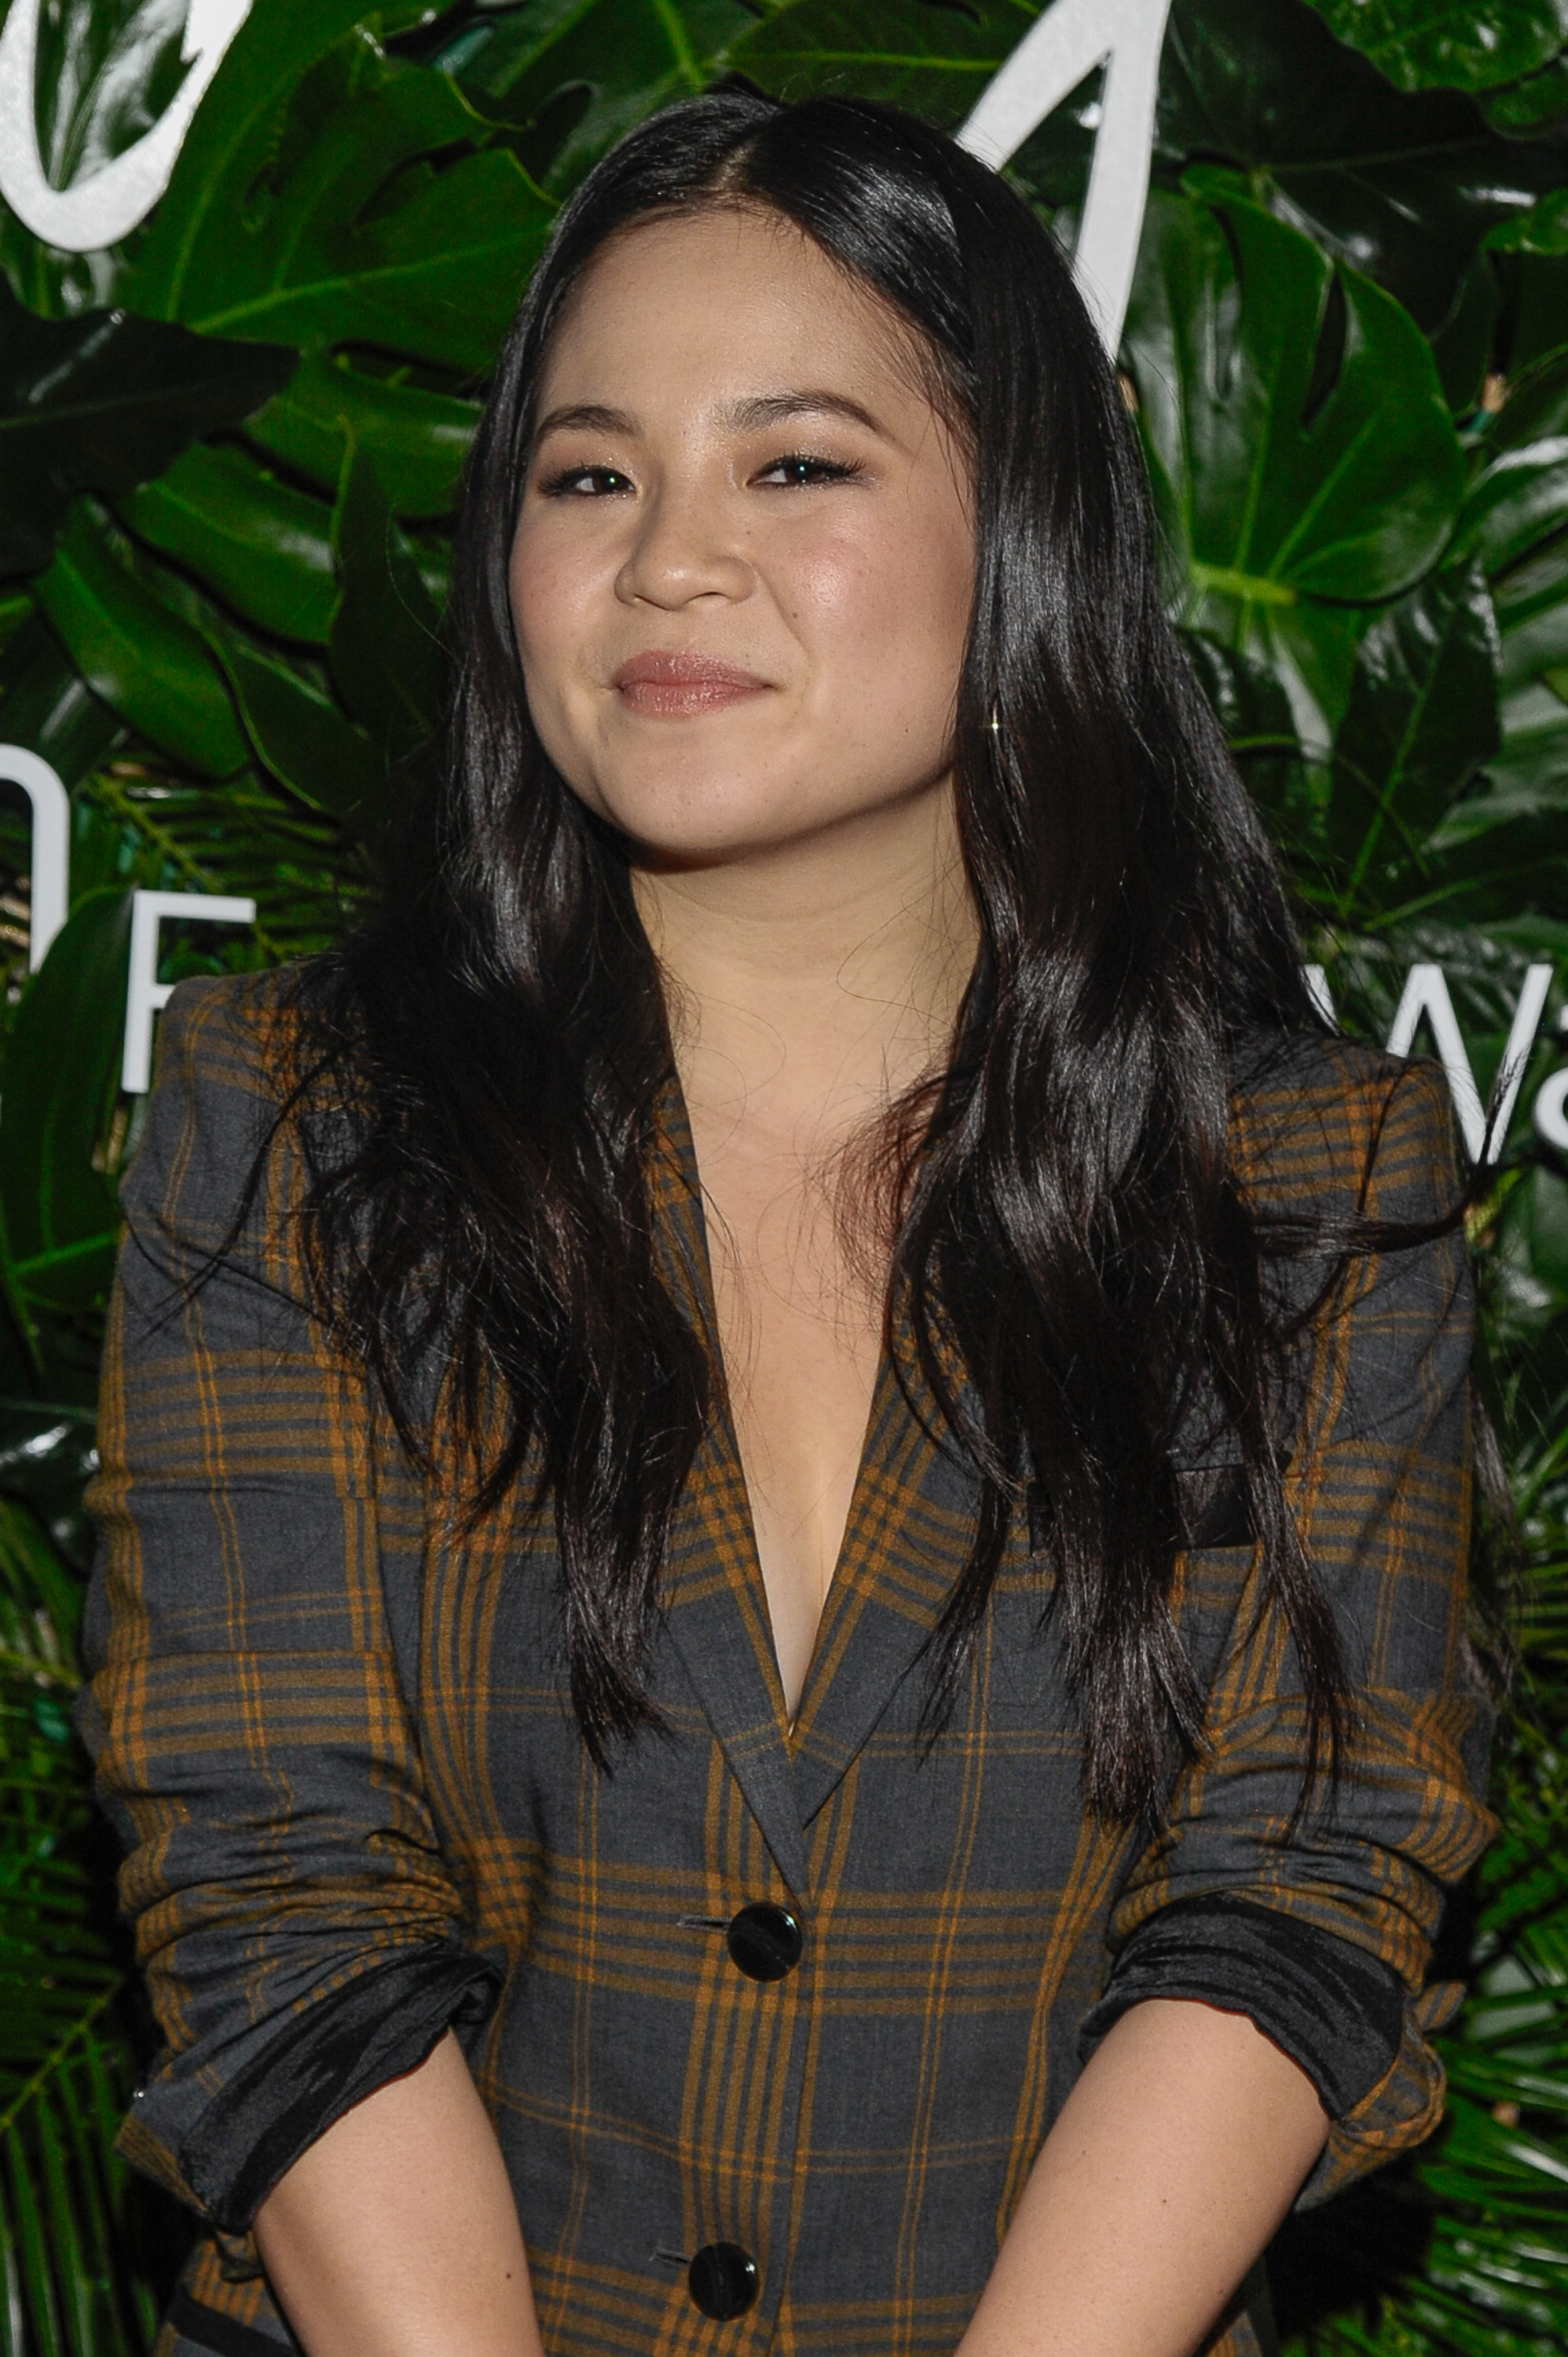 Kelly Marie Tran on the red carpet